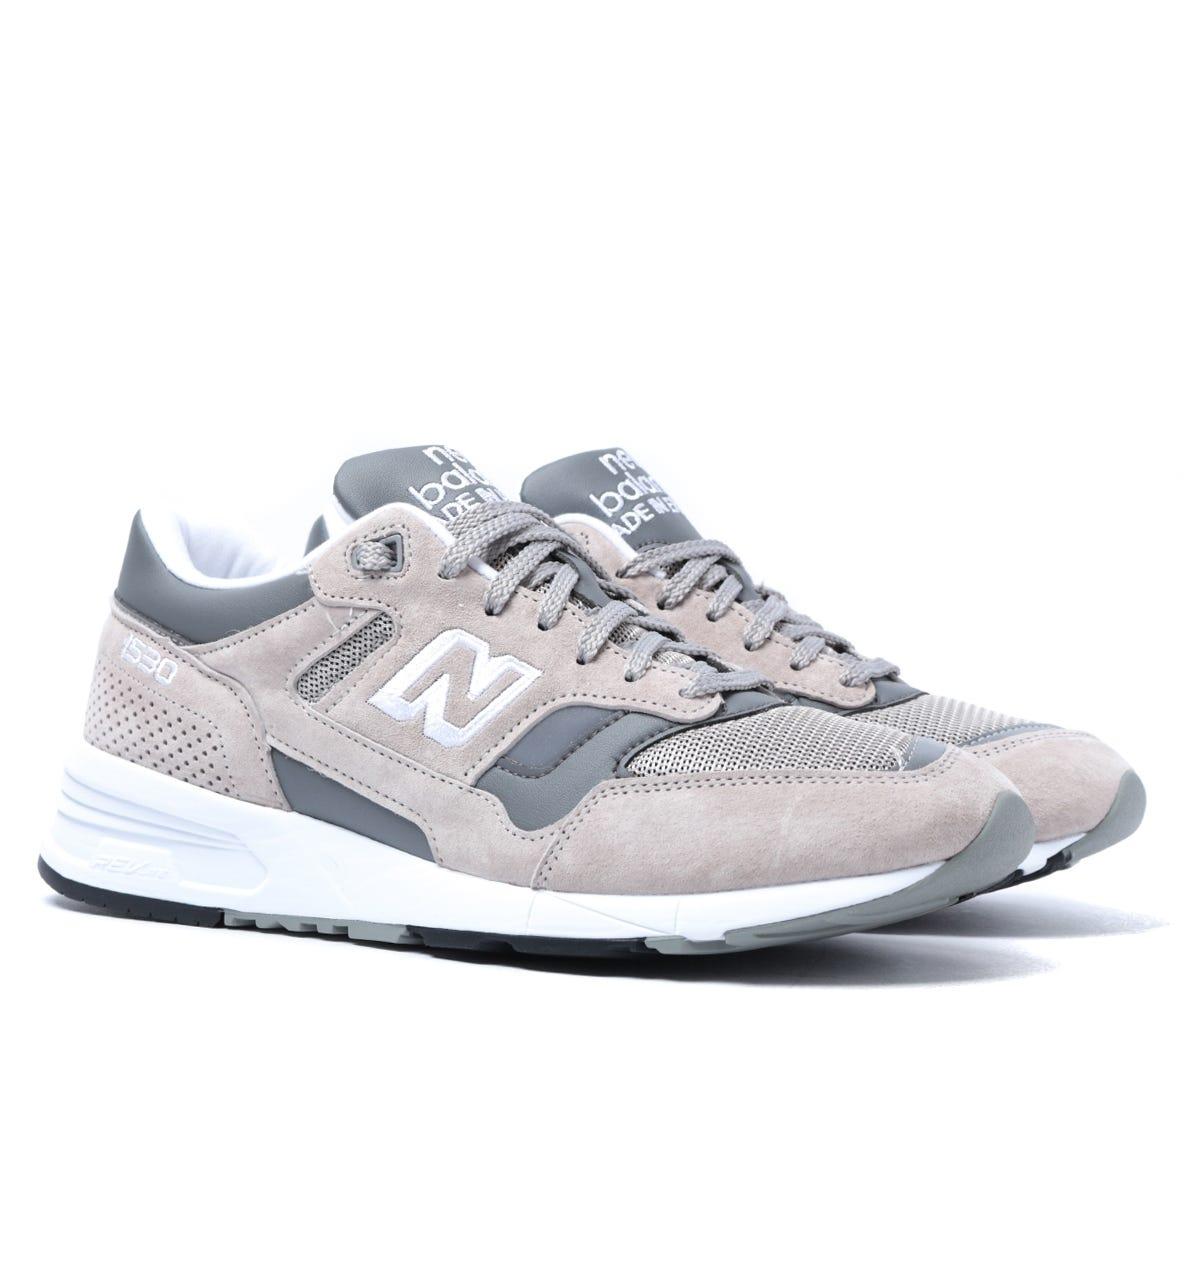 New Balance 1530 Made In England Tan, Grey & White Suede Trainers ...